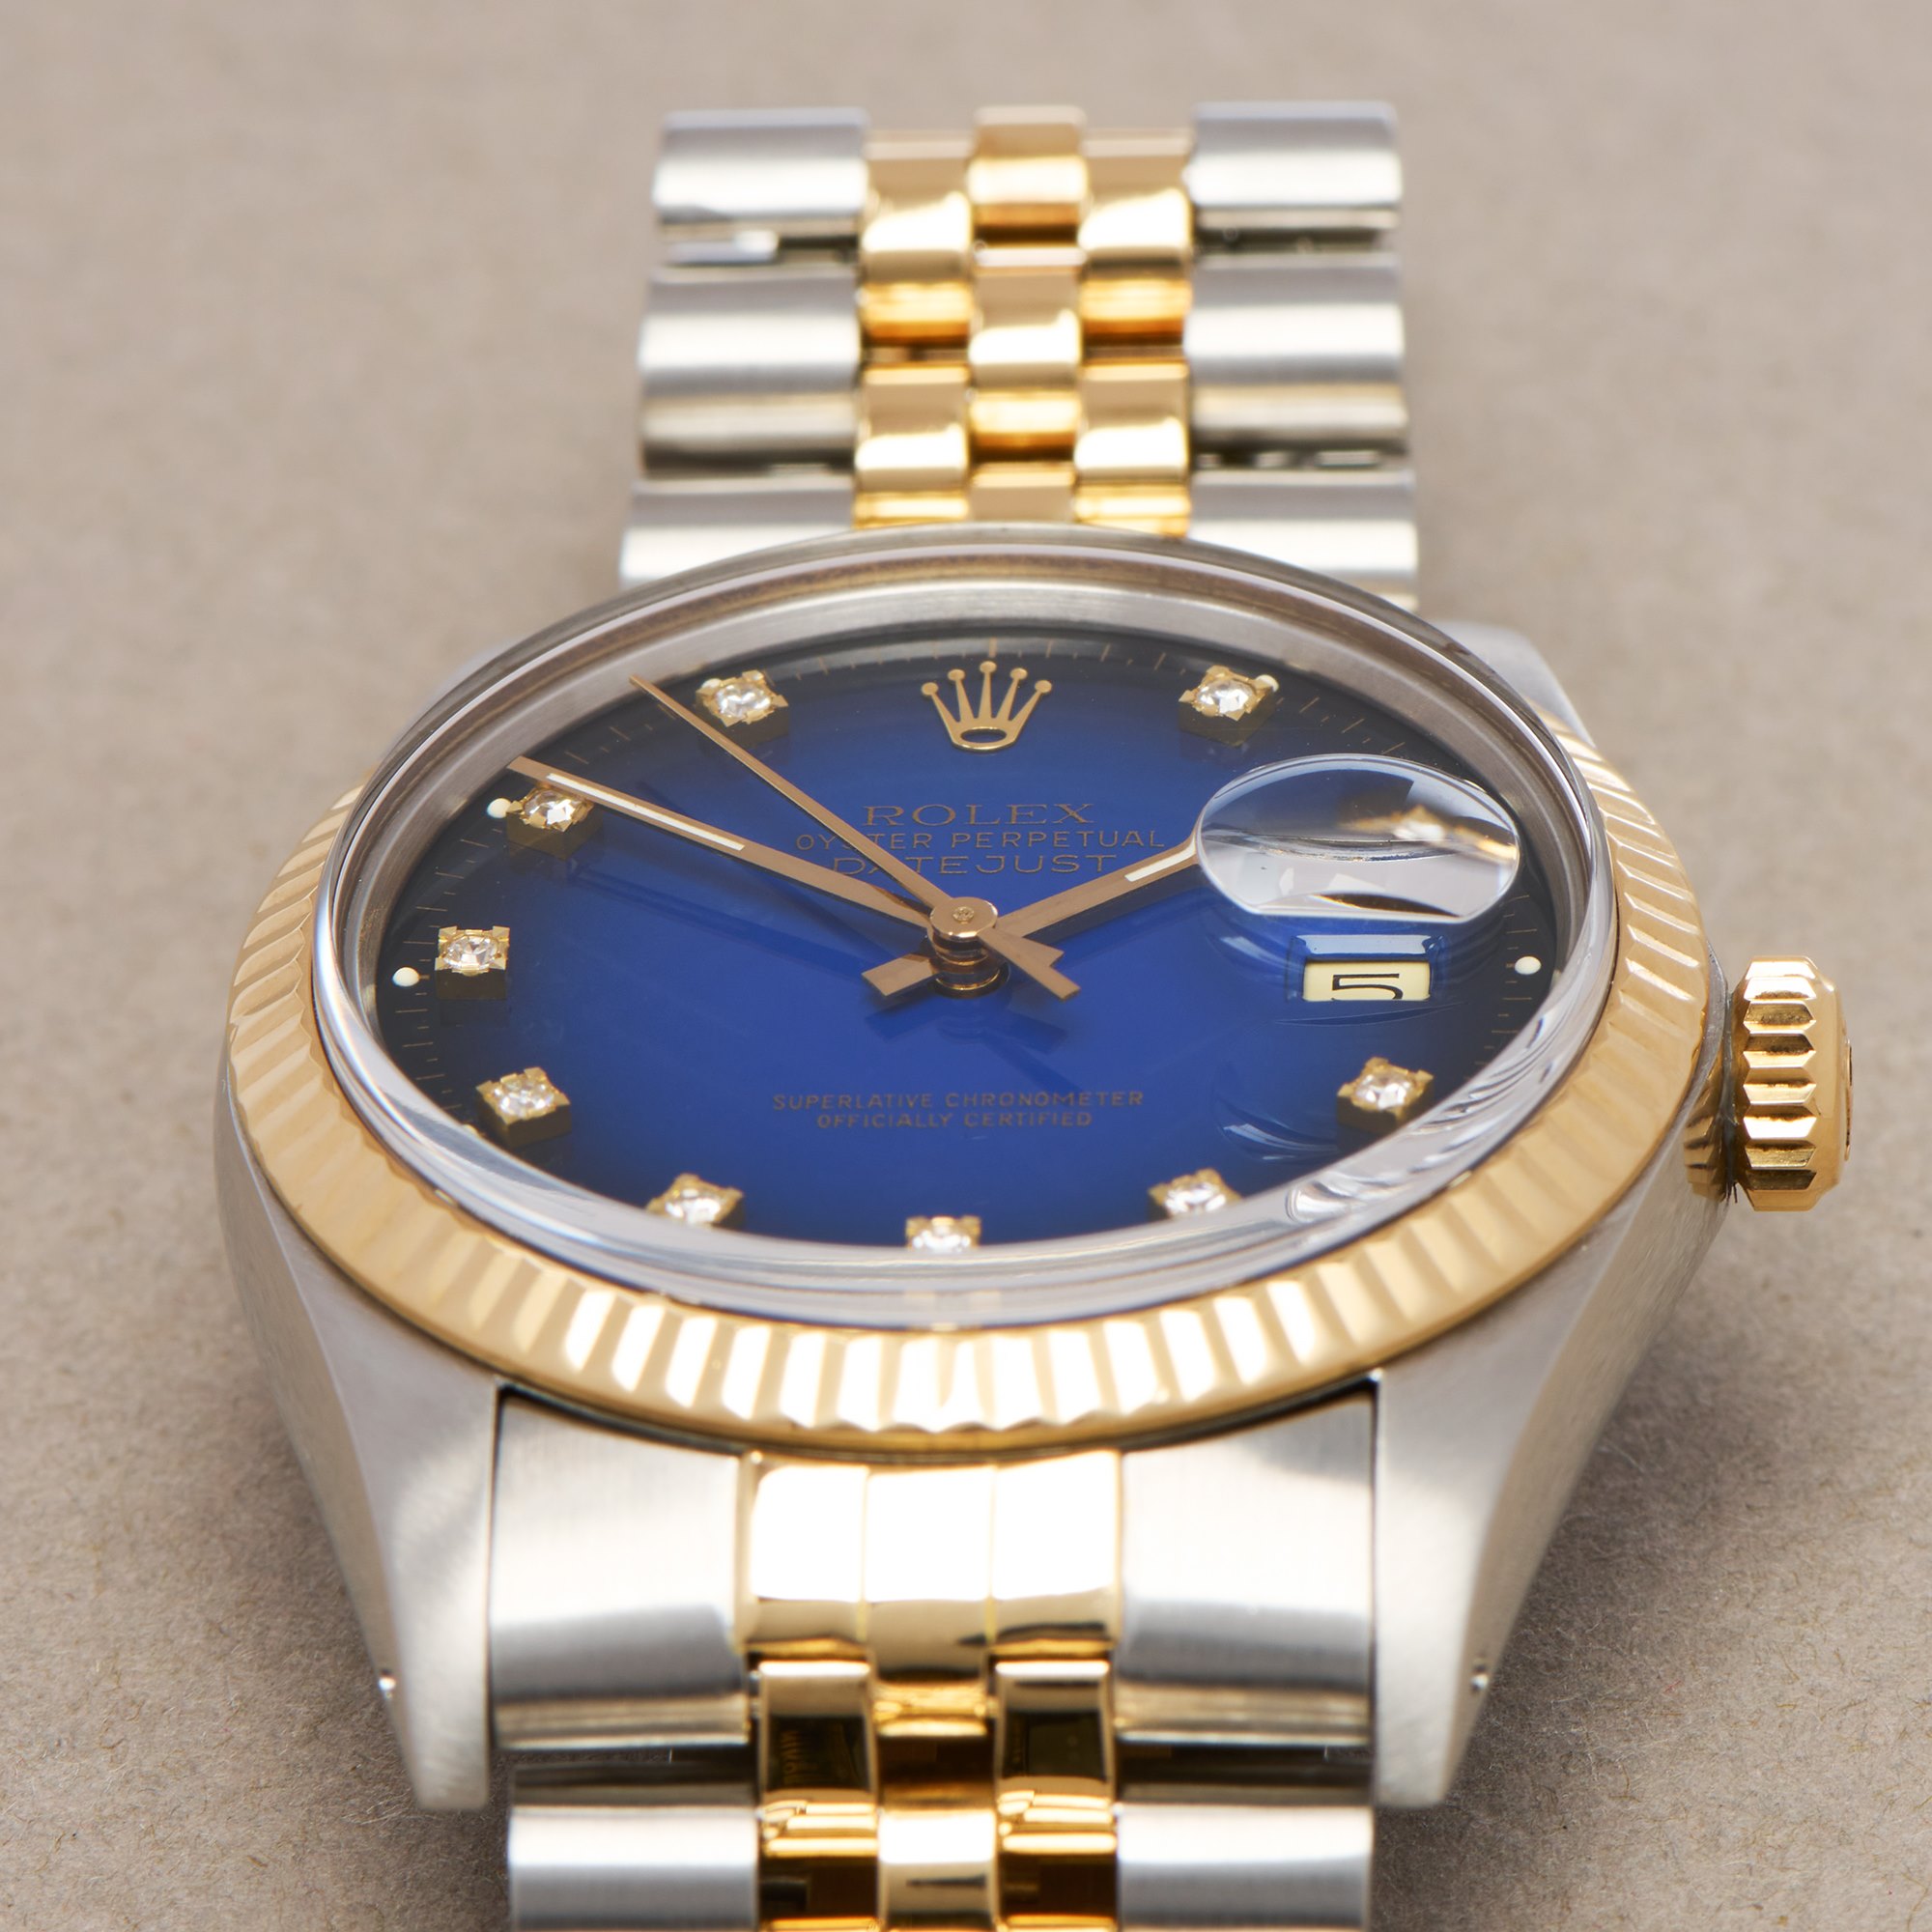 Rolex Datejust 36 18K Yellow Gold & Stainless Steel 16013